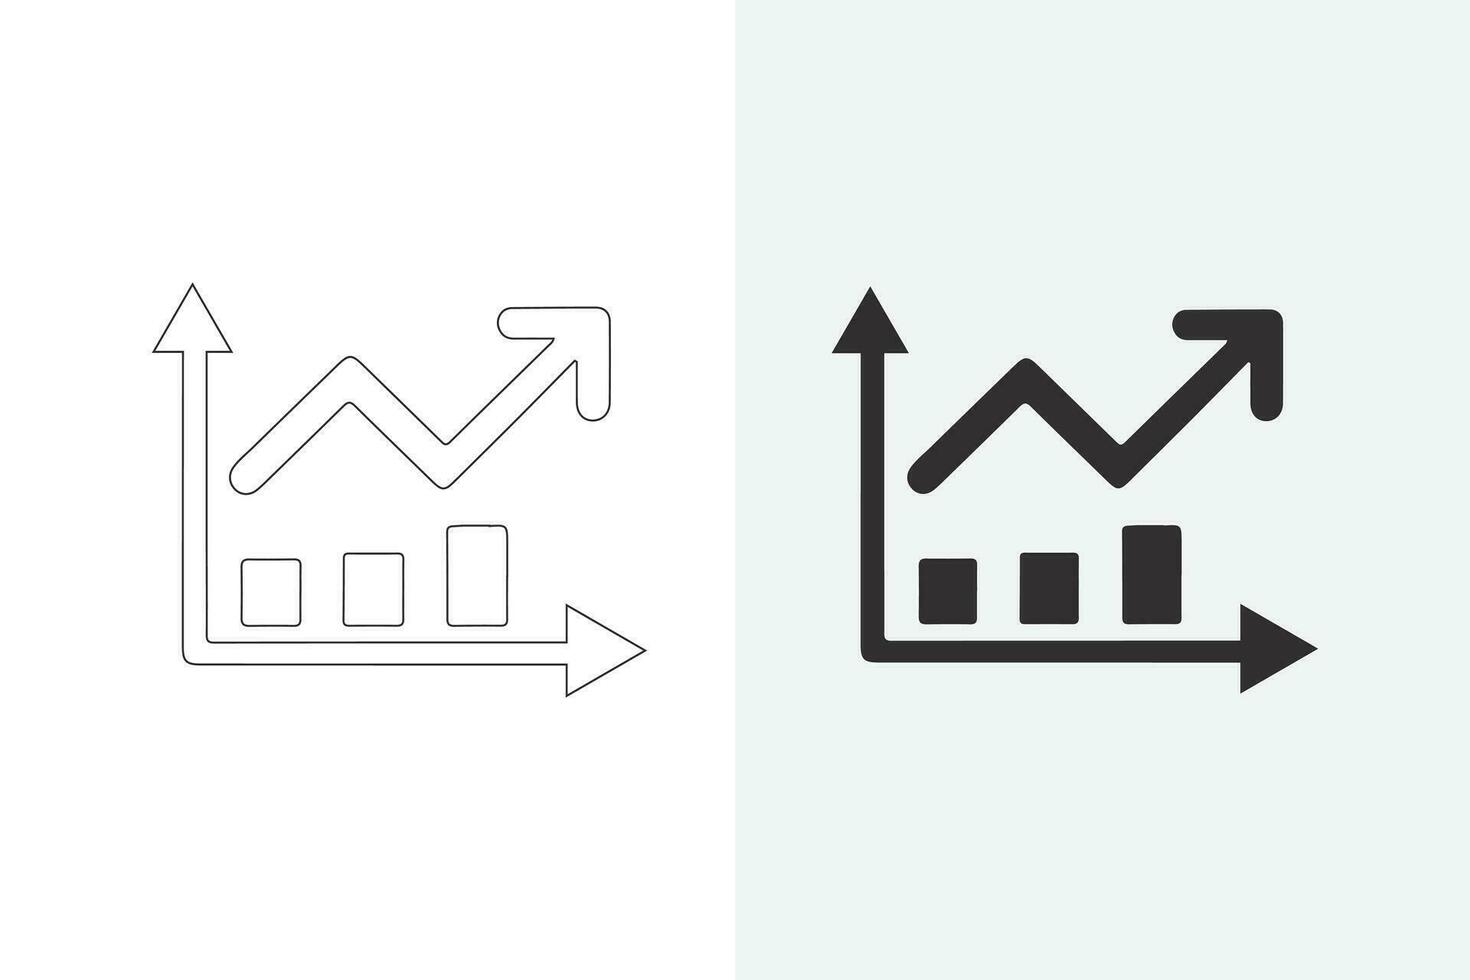 Icons representing percentage growth and decline are placed. Stock vector collection of percent, arrow, up, down, and line style symbols